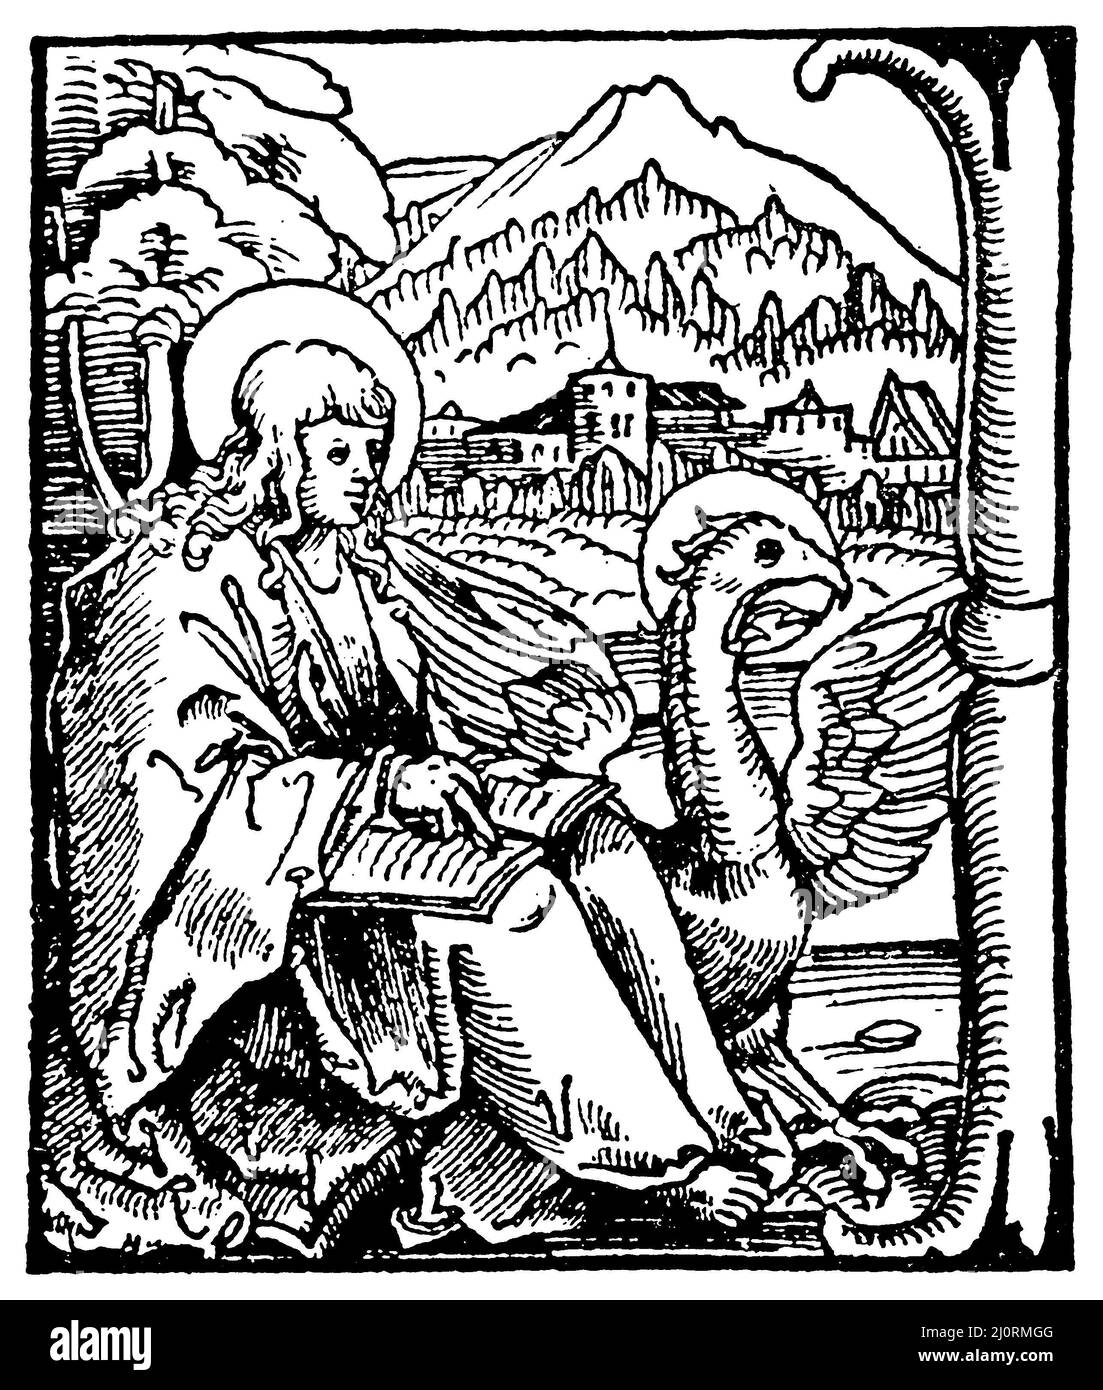 Initial from the first edition of Luther's New Testament, the so-called September Bible, published in Wittenberg in September 1522, ,  (literary history book, 1896), Initiale aus der im September 1522 in Wittenberg erschienenen ersten Ausgabe von Luthers Neuem Testament, der sogenannten Septemberbibel, Initiale de la première édition du Nouveau Testament de Luther, dite Bible de septembre, publiée à Wittenberg en septembre 1522. Stock Photo